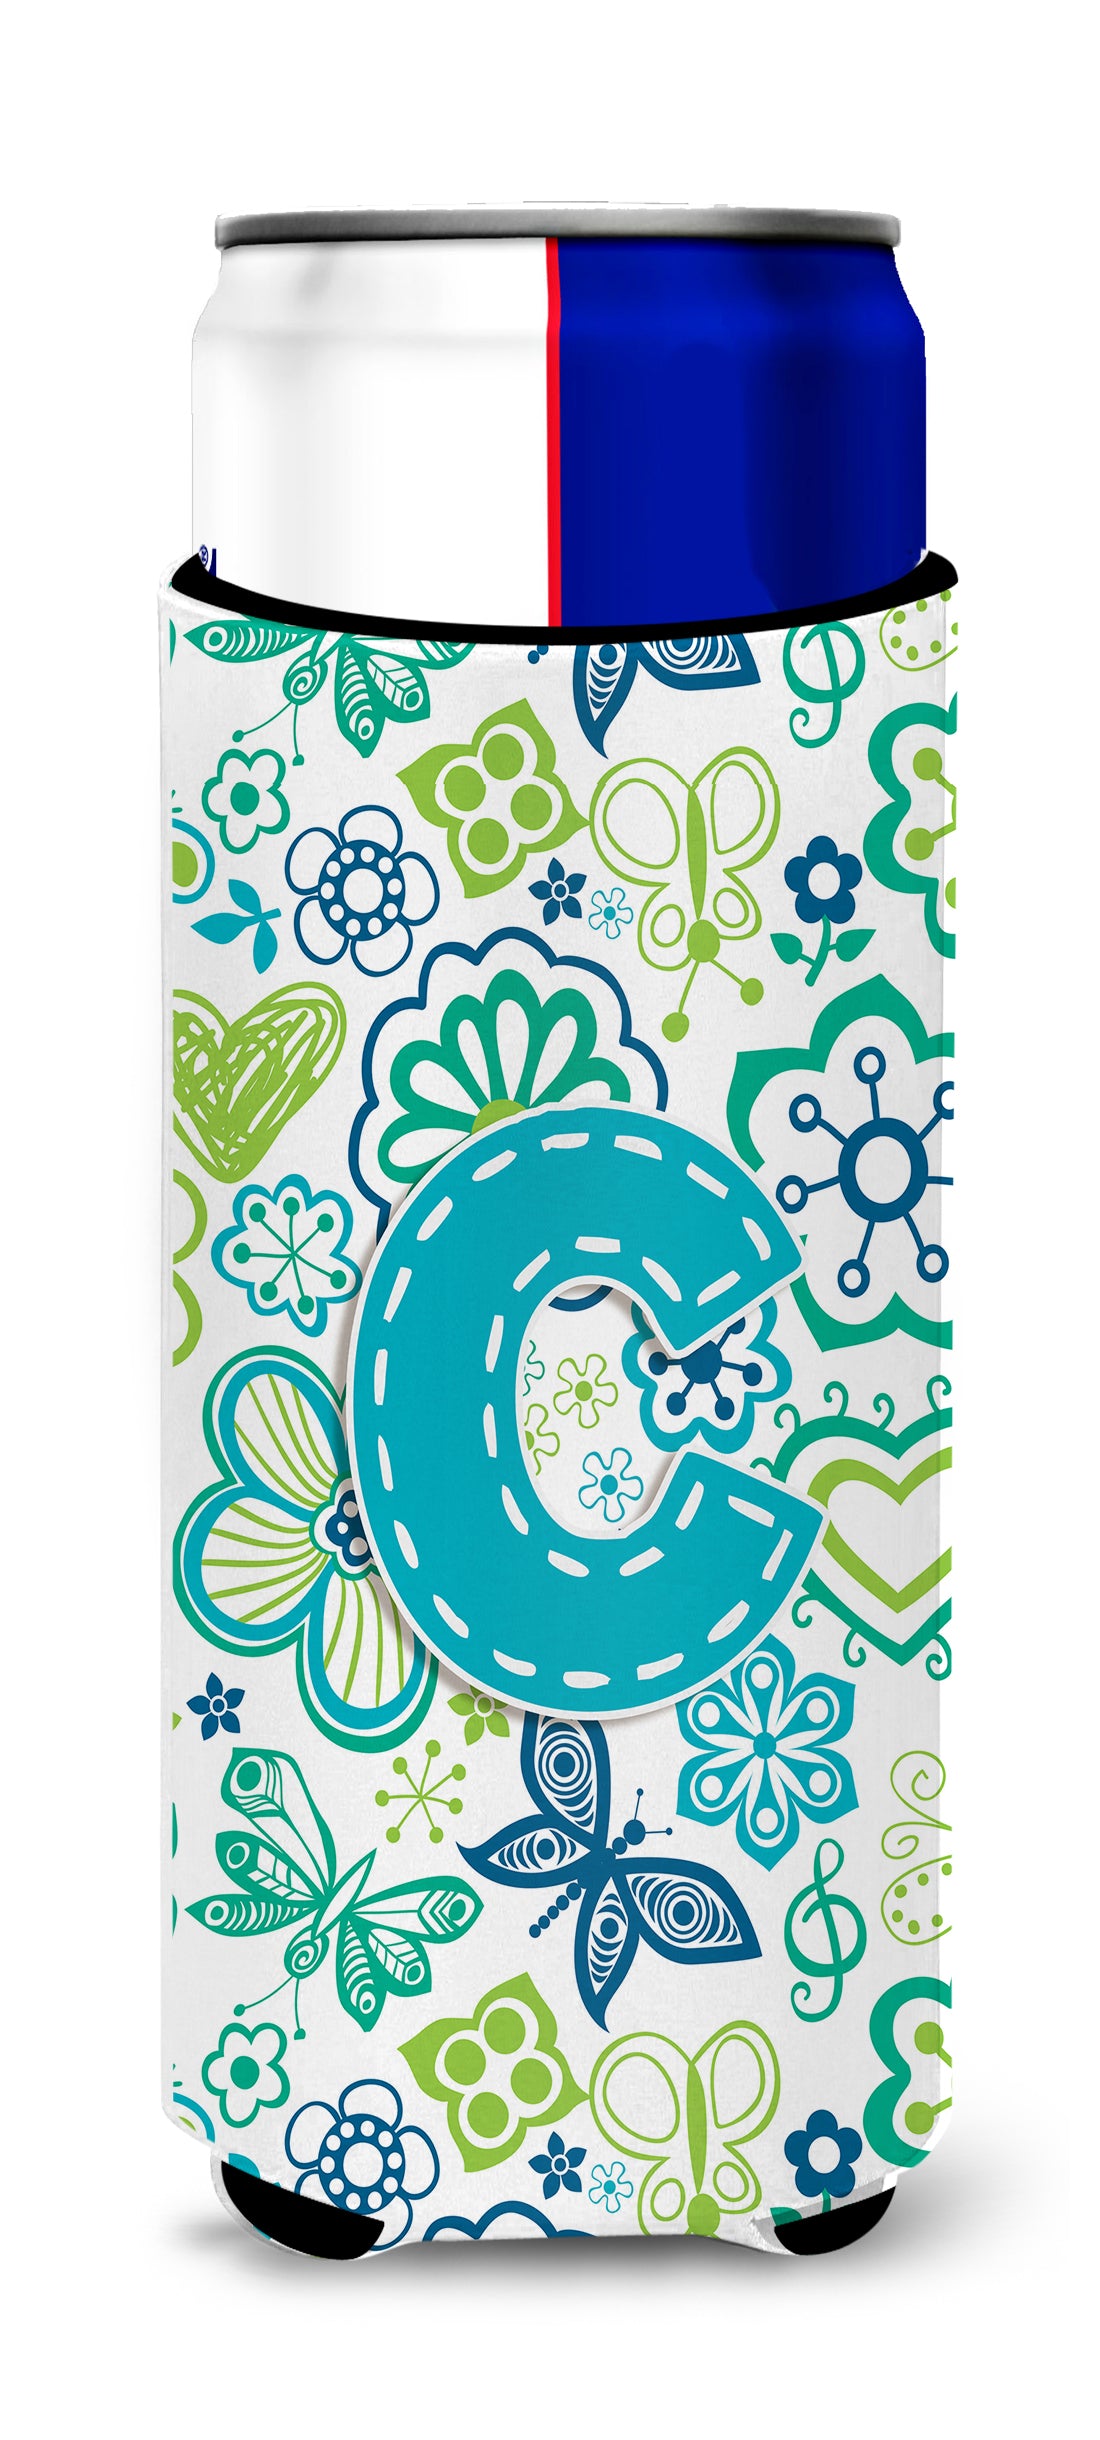 Letter C Flowers and Butterflies Teal Blue Ultra Beverage Insulators for slim cans CJ2006-CMUK.